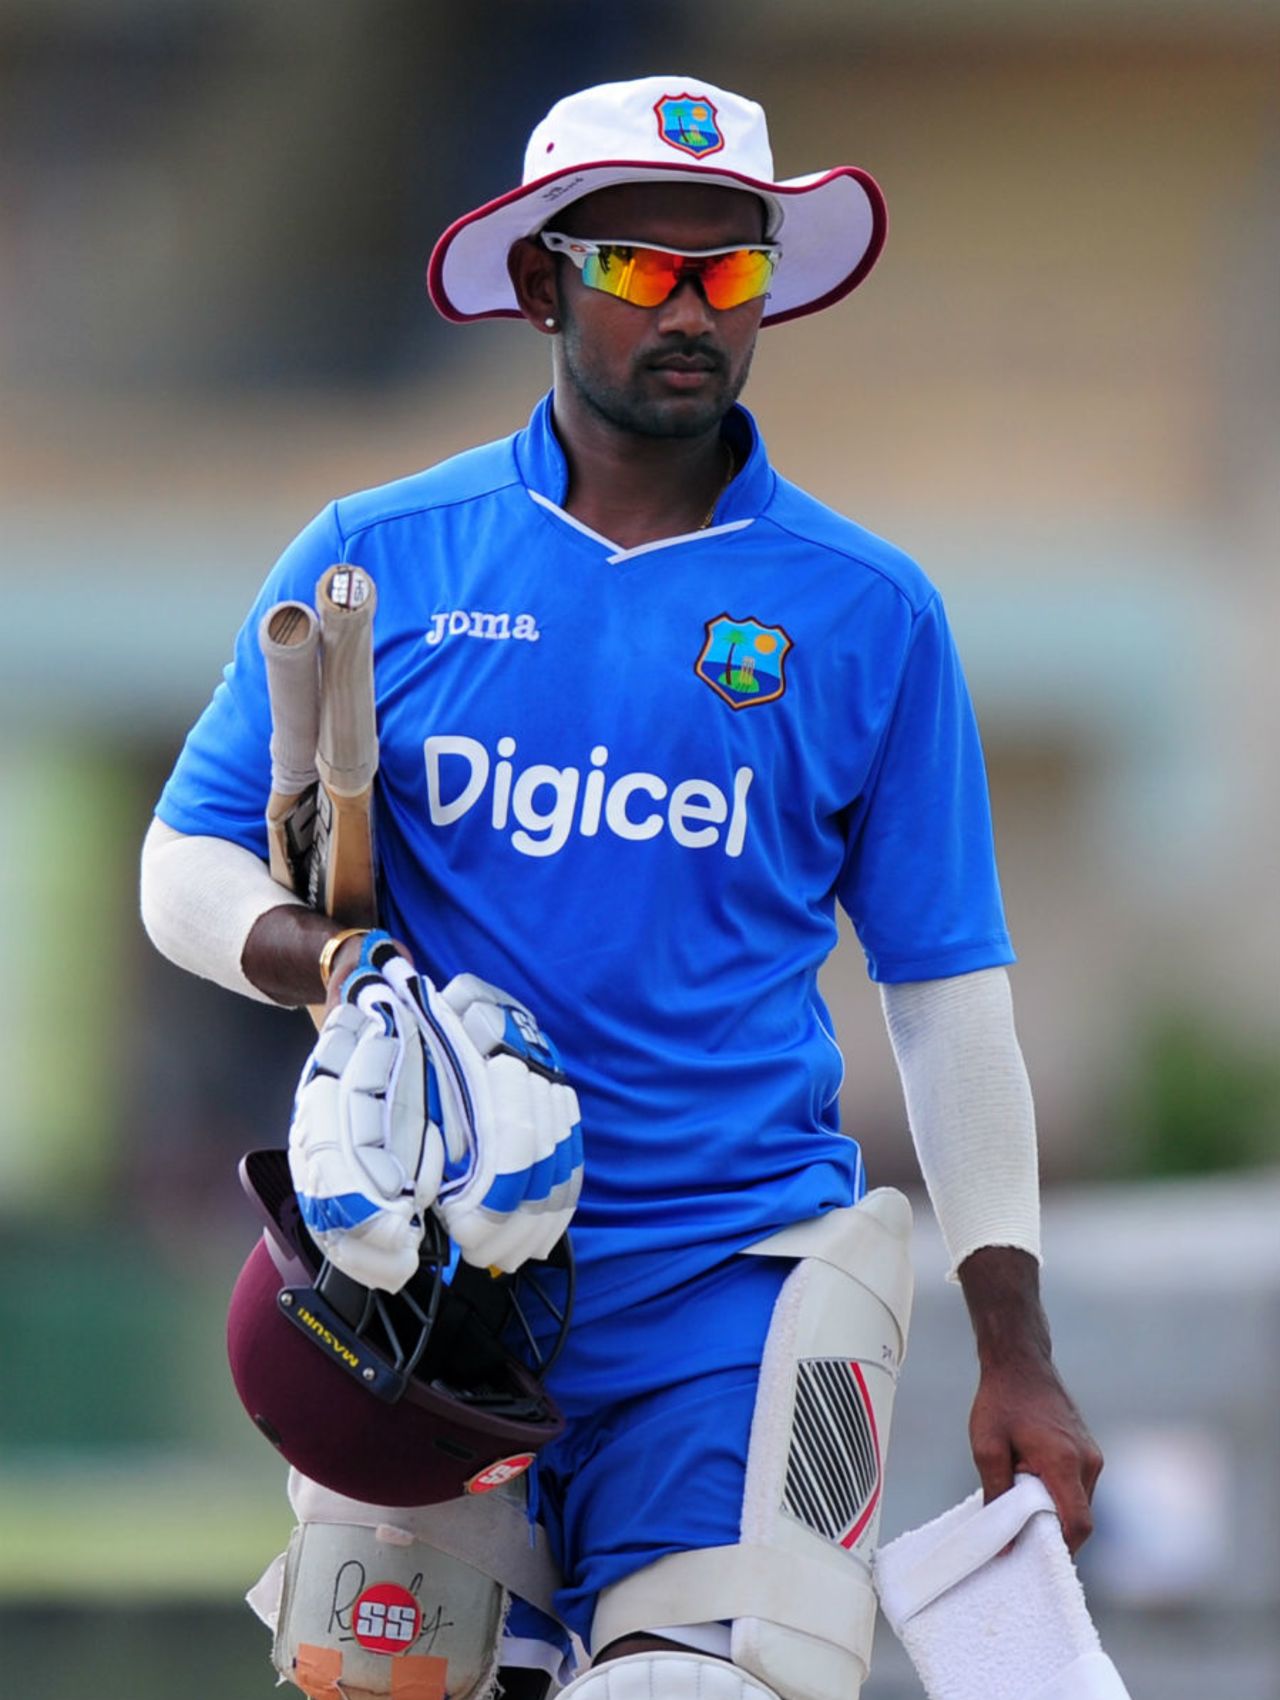 Denesh Ramdin at a training session on the eve of the first Test against Sri Lanka, Galle, October 13, 2015